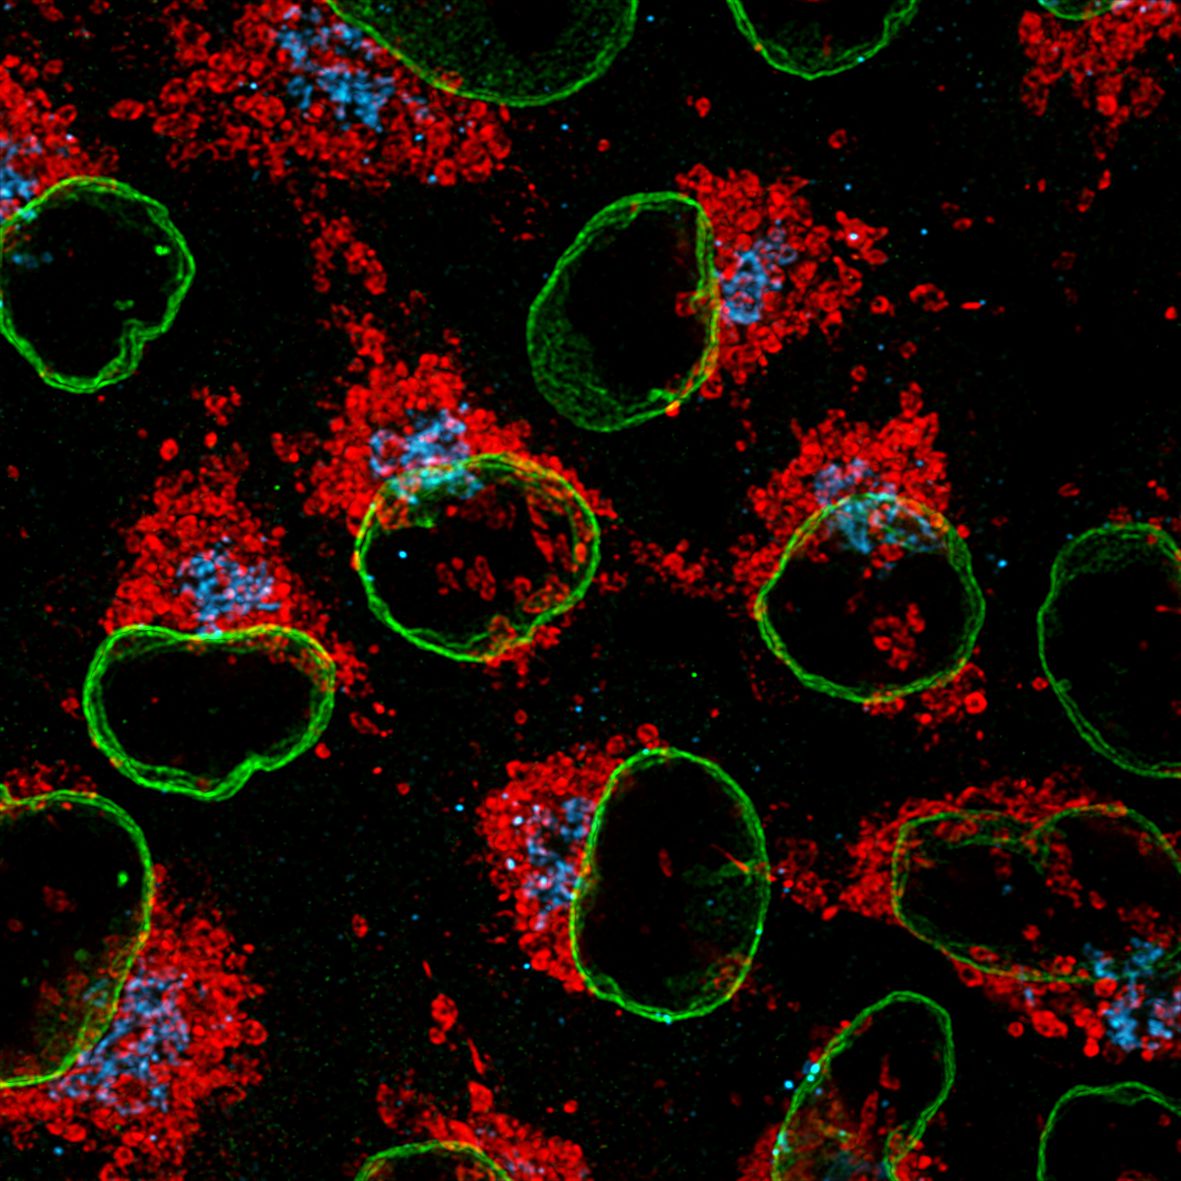 Immunofluorescence of HeLa: PFA-fixed HeLa cells were stained with anti-Lamin B1 (66095-1-Ig) labeled with FlexAble CoraLite® 488 Kit (KFA021, green), anti-HSP60 (66041-1-Ig) labeled with FlexAble CoraLite® Plus 550 Kit (KFA022, red) and anti-GORASP2 (66627-1-Ig) labeled with FlexAble CoraLite® Plus 650 Kit (KFA023, cyan).​ Confocal images were acquired with a 100x oil objective and post-processed. Images were recorded at the Core Facility Bioimaging at the Biomedical Center, LMU Munich.